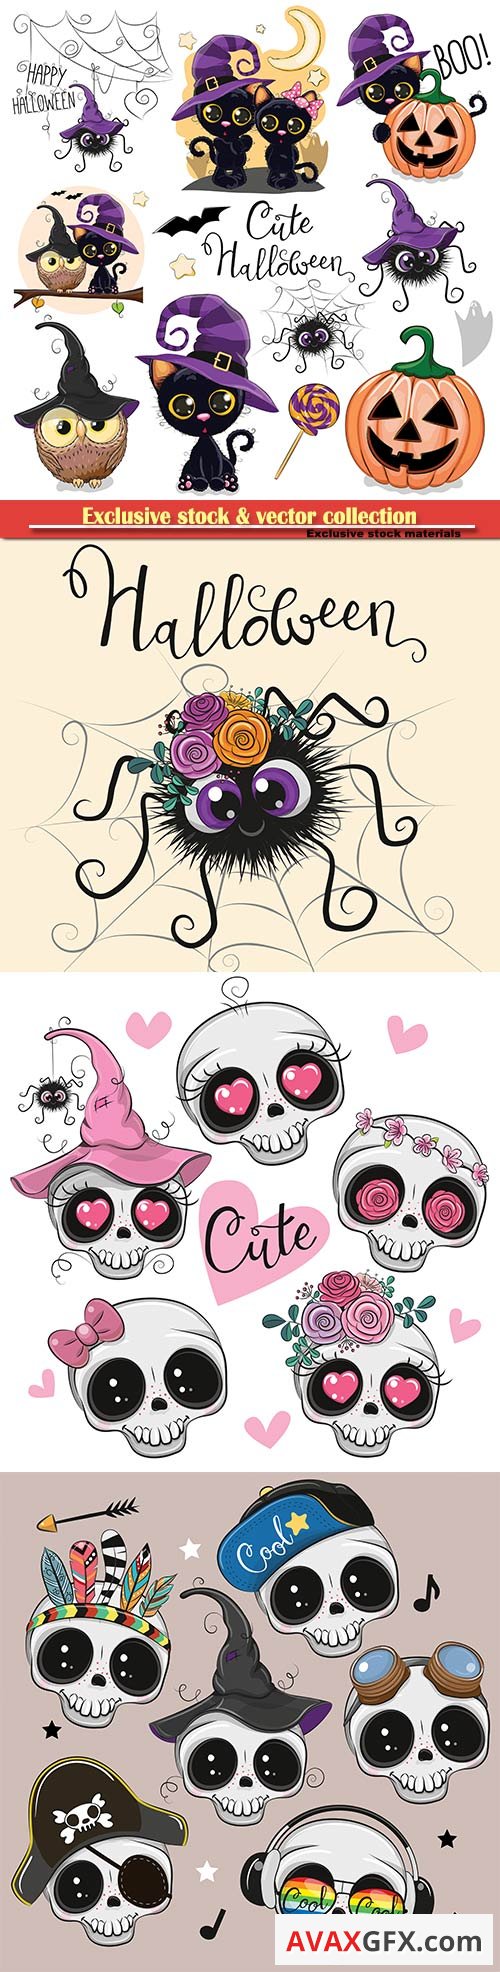 Set of Cute Halloween illustrations and design elements